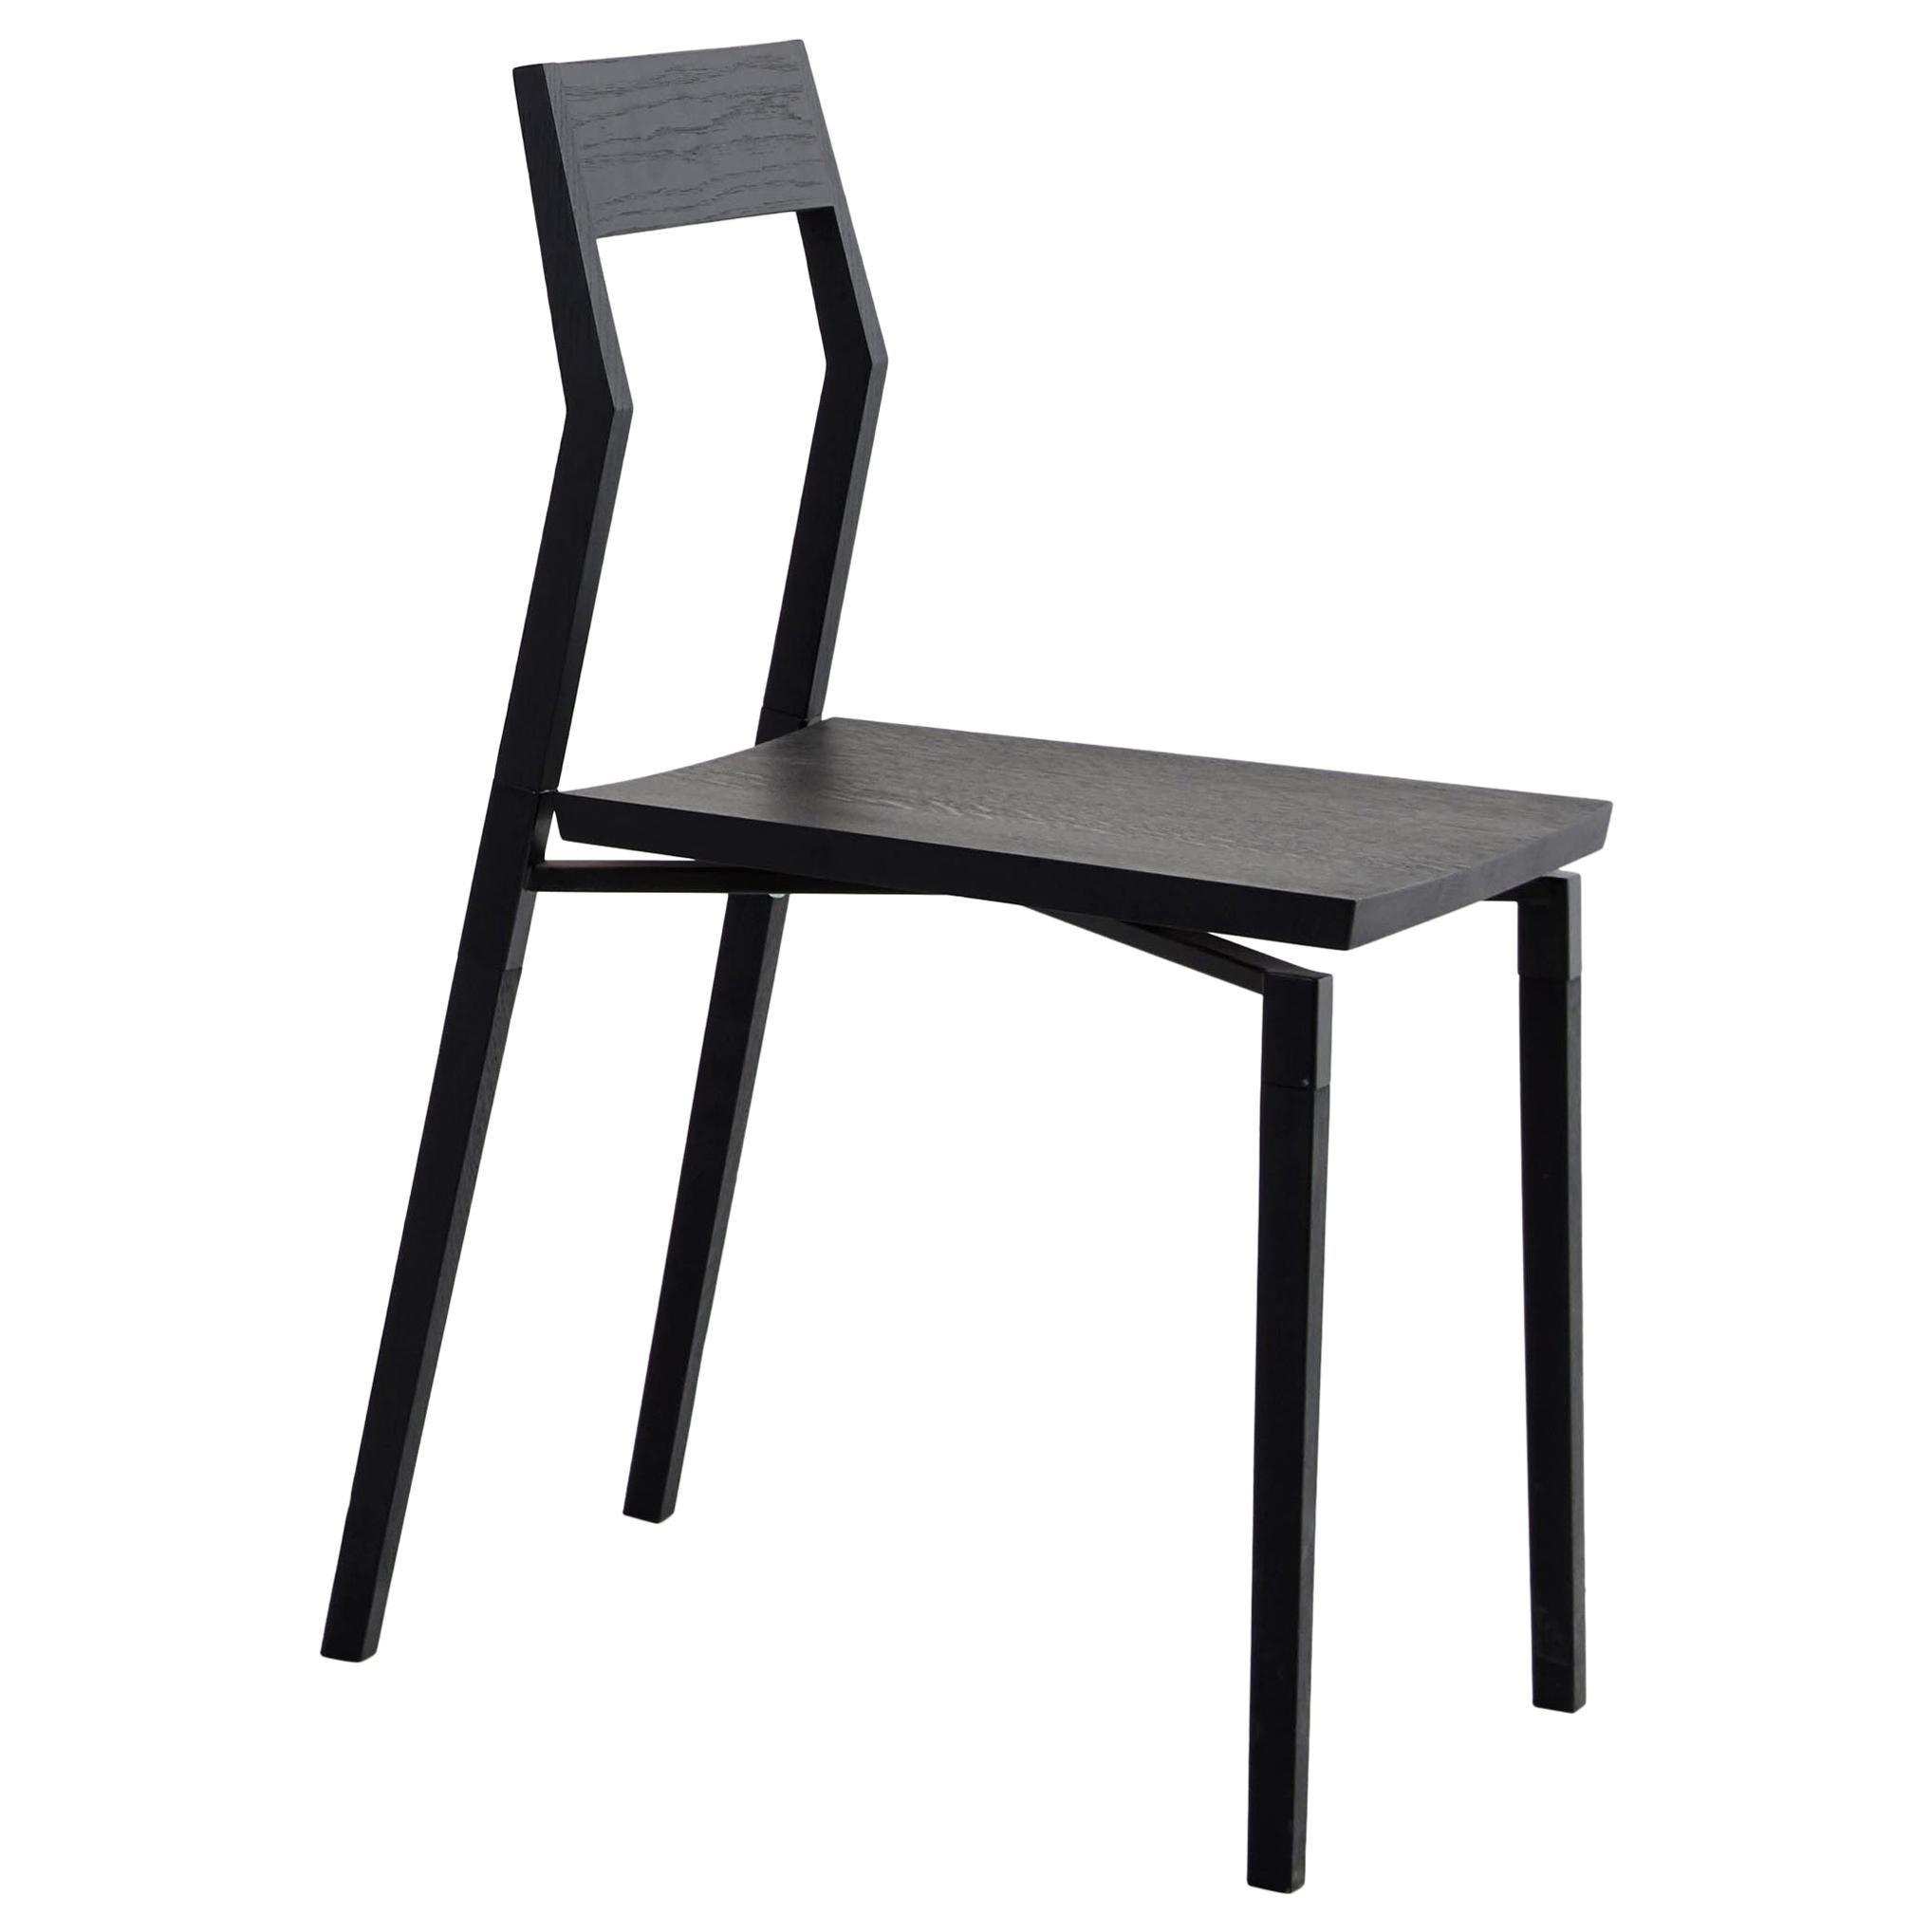 Walnut Parkdale Dining Chair by Hollis & Morris